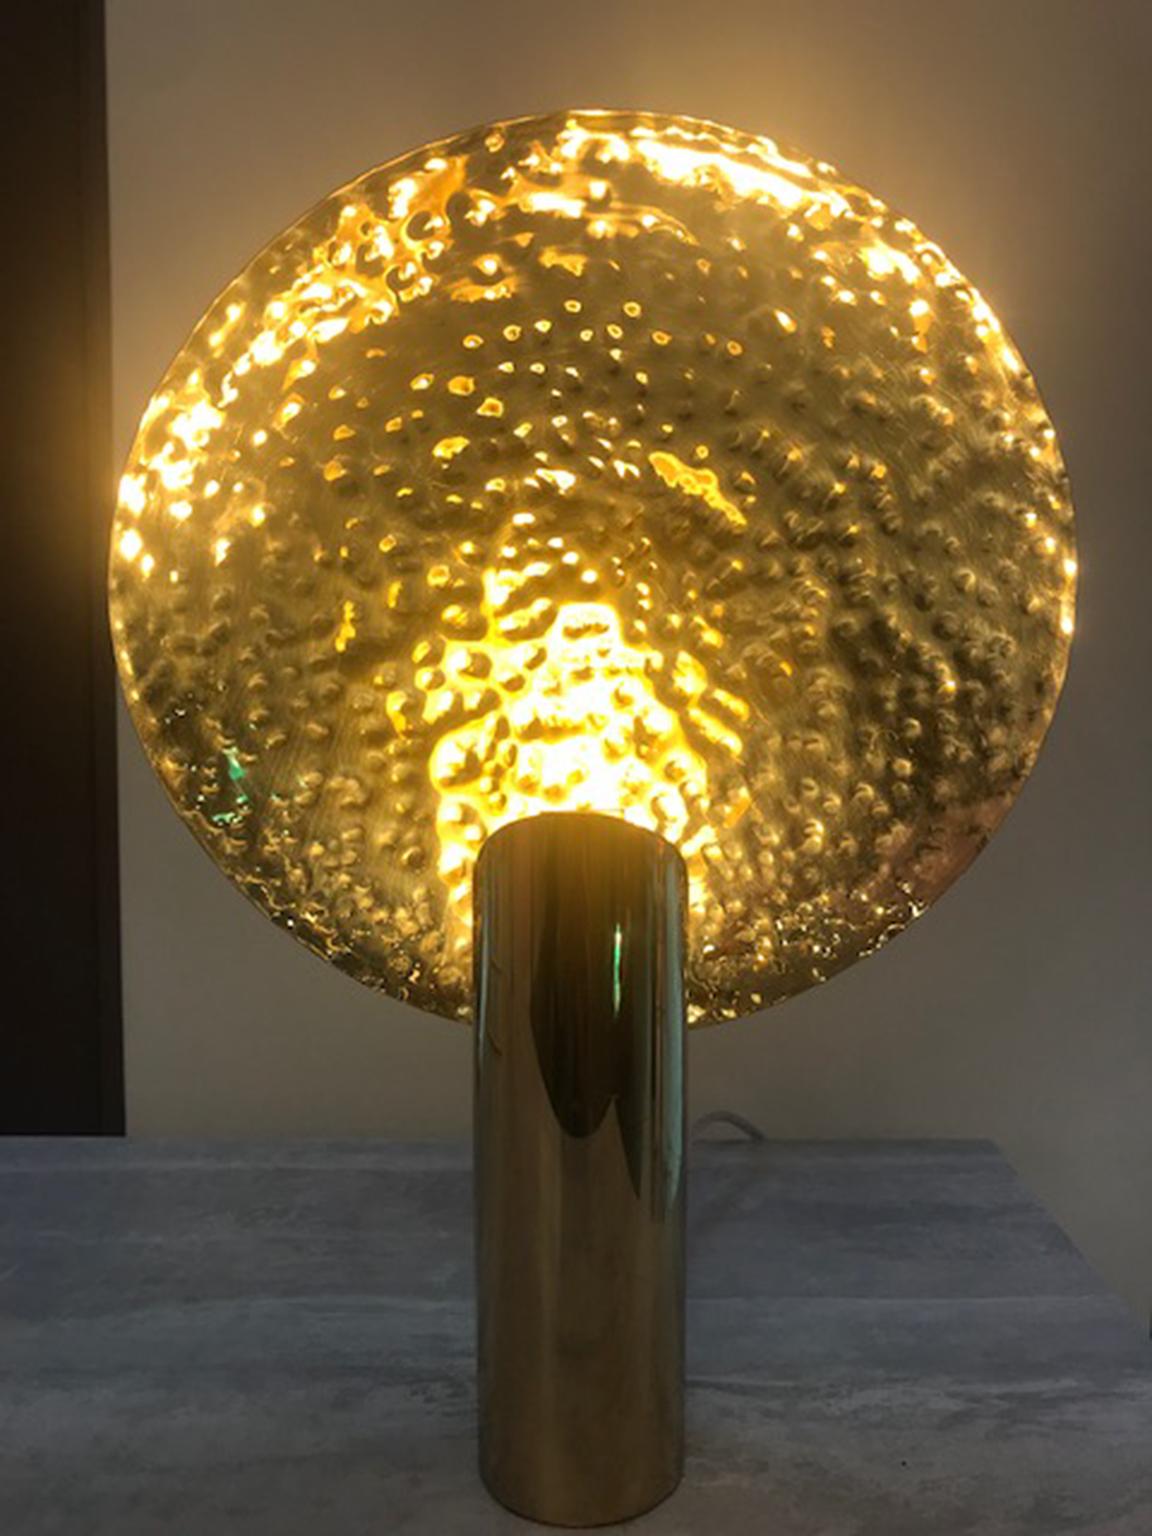 LUNA Contemporary Minimalist Poetic table lamp by Cristiana Bertolucci
Table lamp with contanane design in polished brass. Hand-hammered brass spotlight. The luminaire produces a beautiful reflection of light through the reflector.
The luminaire is